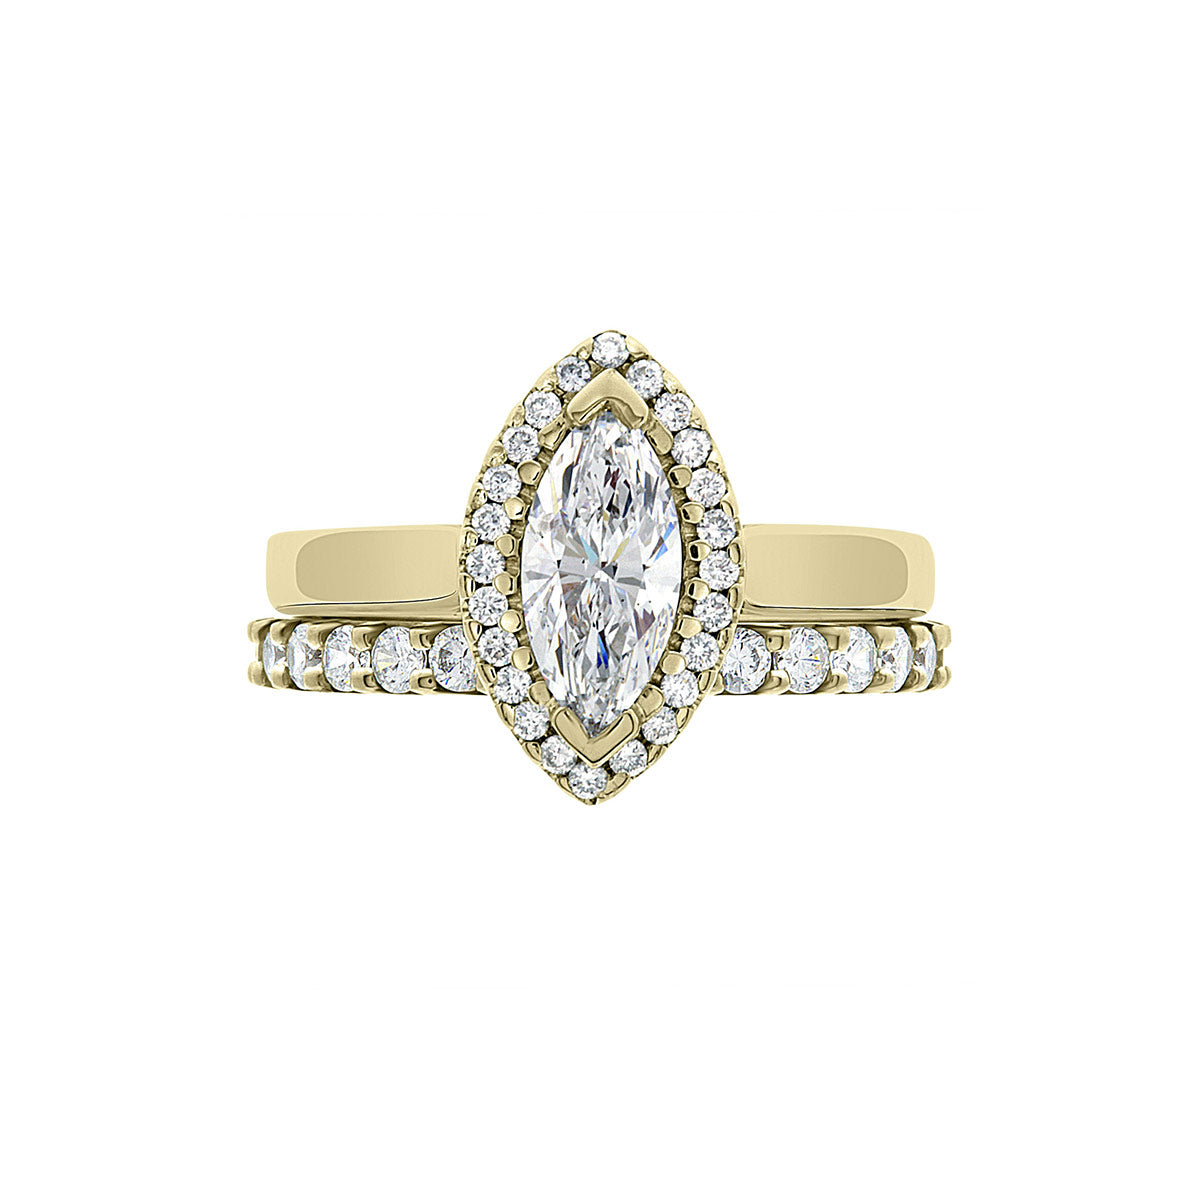 Marquise Cut Halo Ring in yellow gold with a matching diamond wedding ring